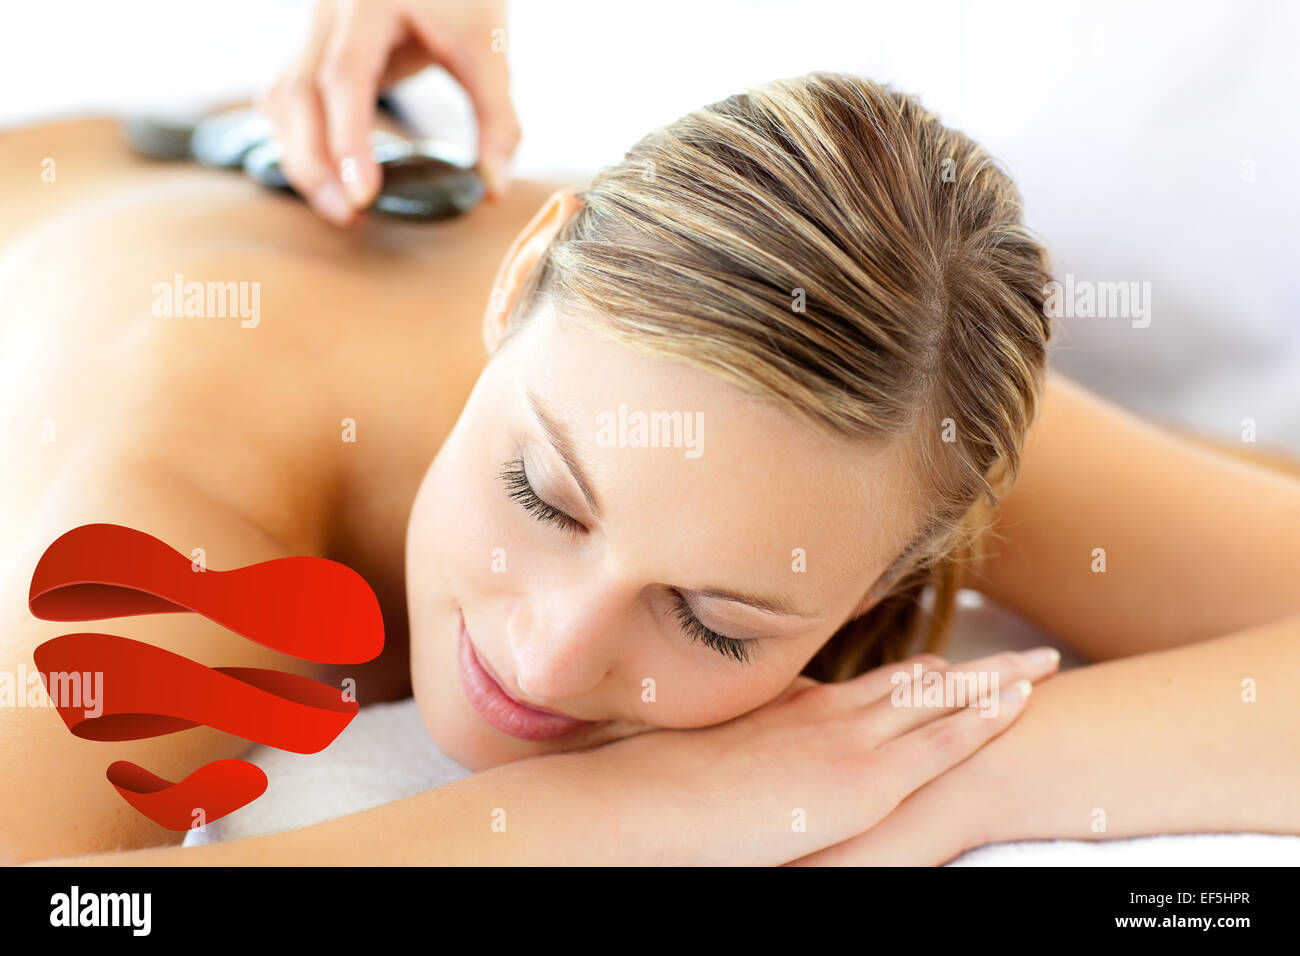 Composite image of attractive woman having a massage Stock Photo